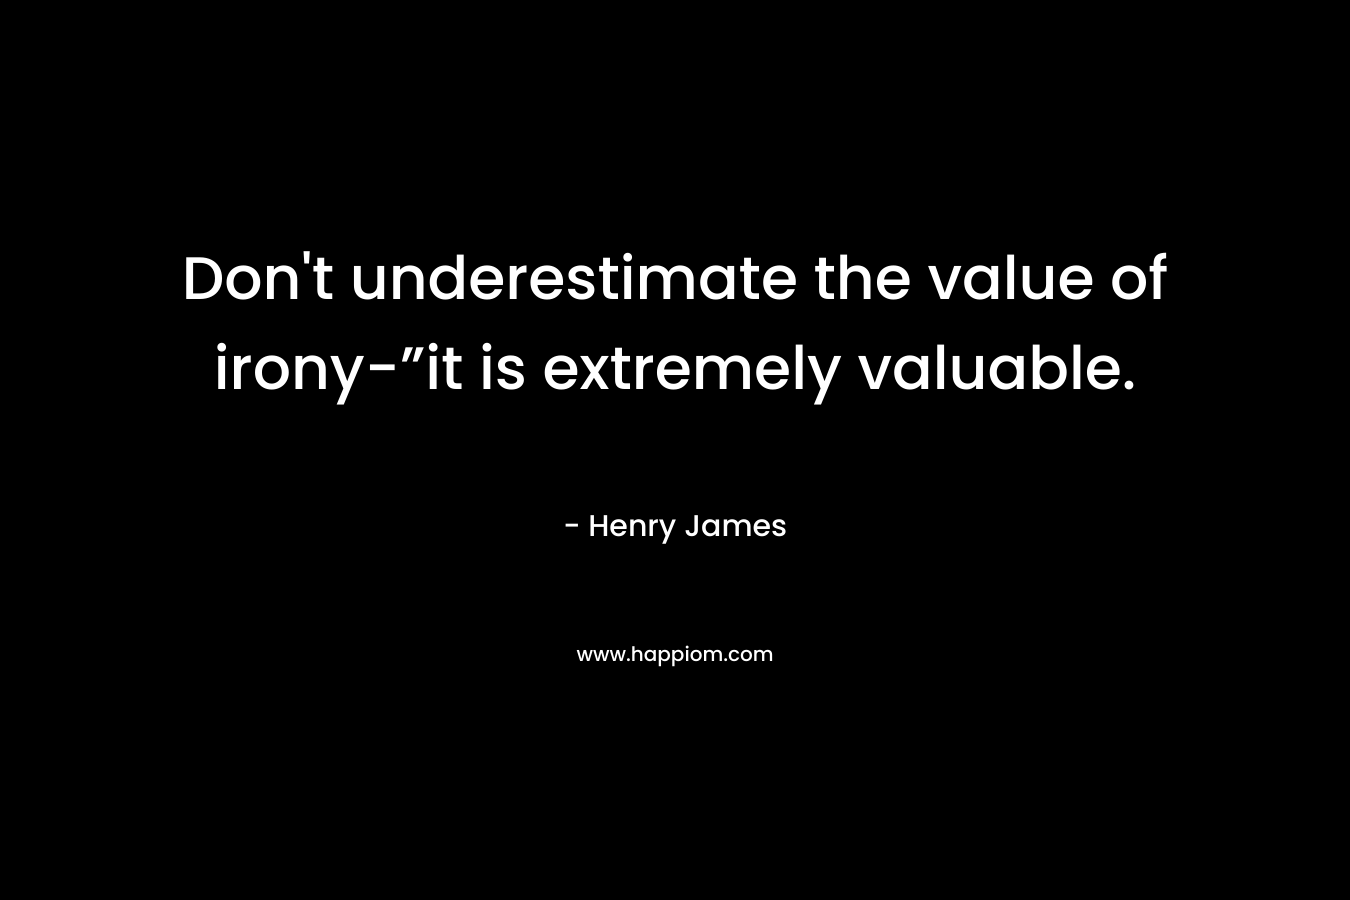 Don’t underestimate the value of irony-”it is extremely valuable. – Henry James